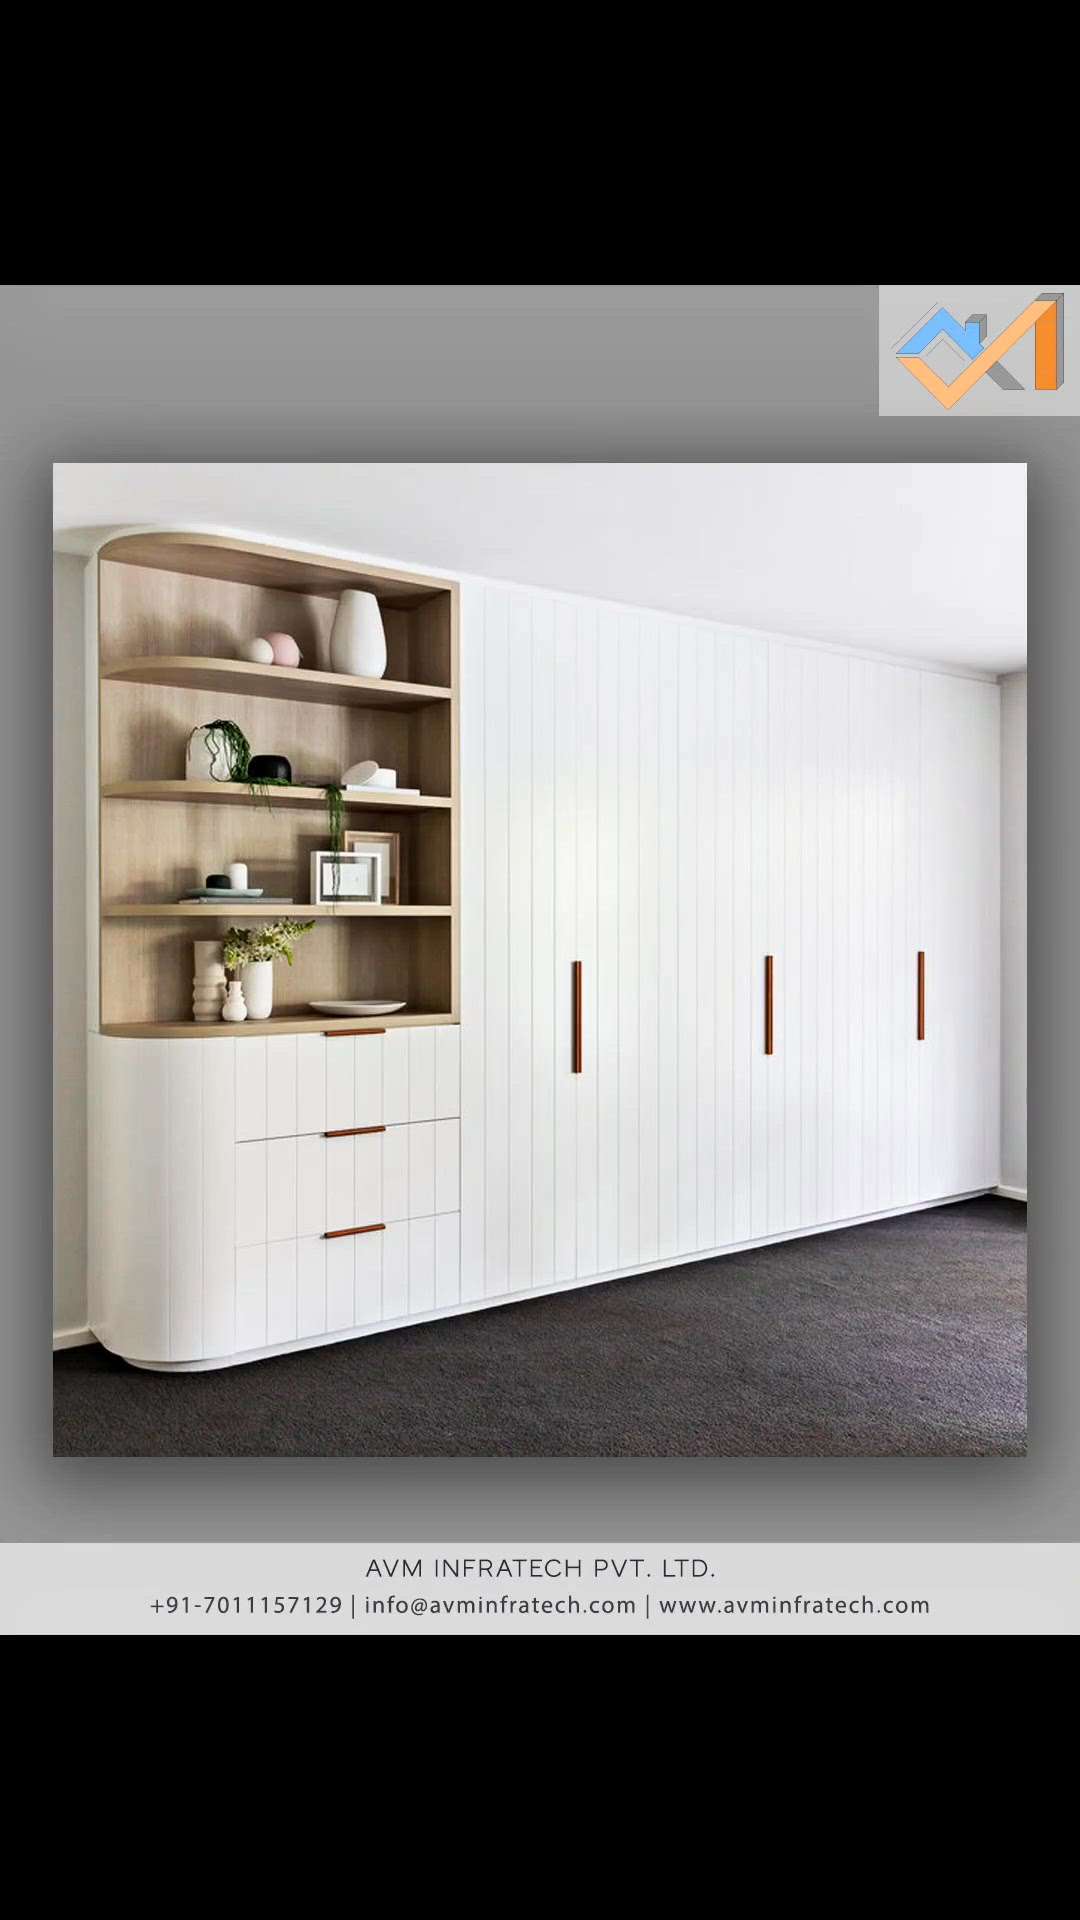 The advantage of using wardrobes with white finishes is its ability to tone down dark hues in the interior and also to create a minimal look for bedrooms that use lighter shades.


Follow us for more such amazing updates. 
.
.
#wardrobe #wardrobestylist #wardrobedesign #wardrobeessentials #wardrobegoals #wardrobebasics #flute #fluted #flutedpanel #flutedpanels #panel #avminfratech #brass #handle #almirah #wood #storage #storageideas